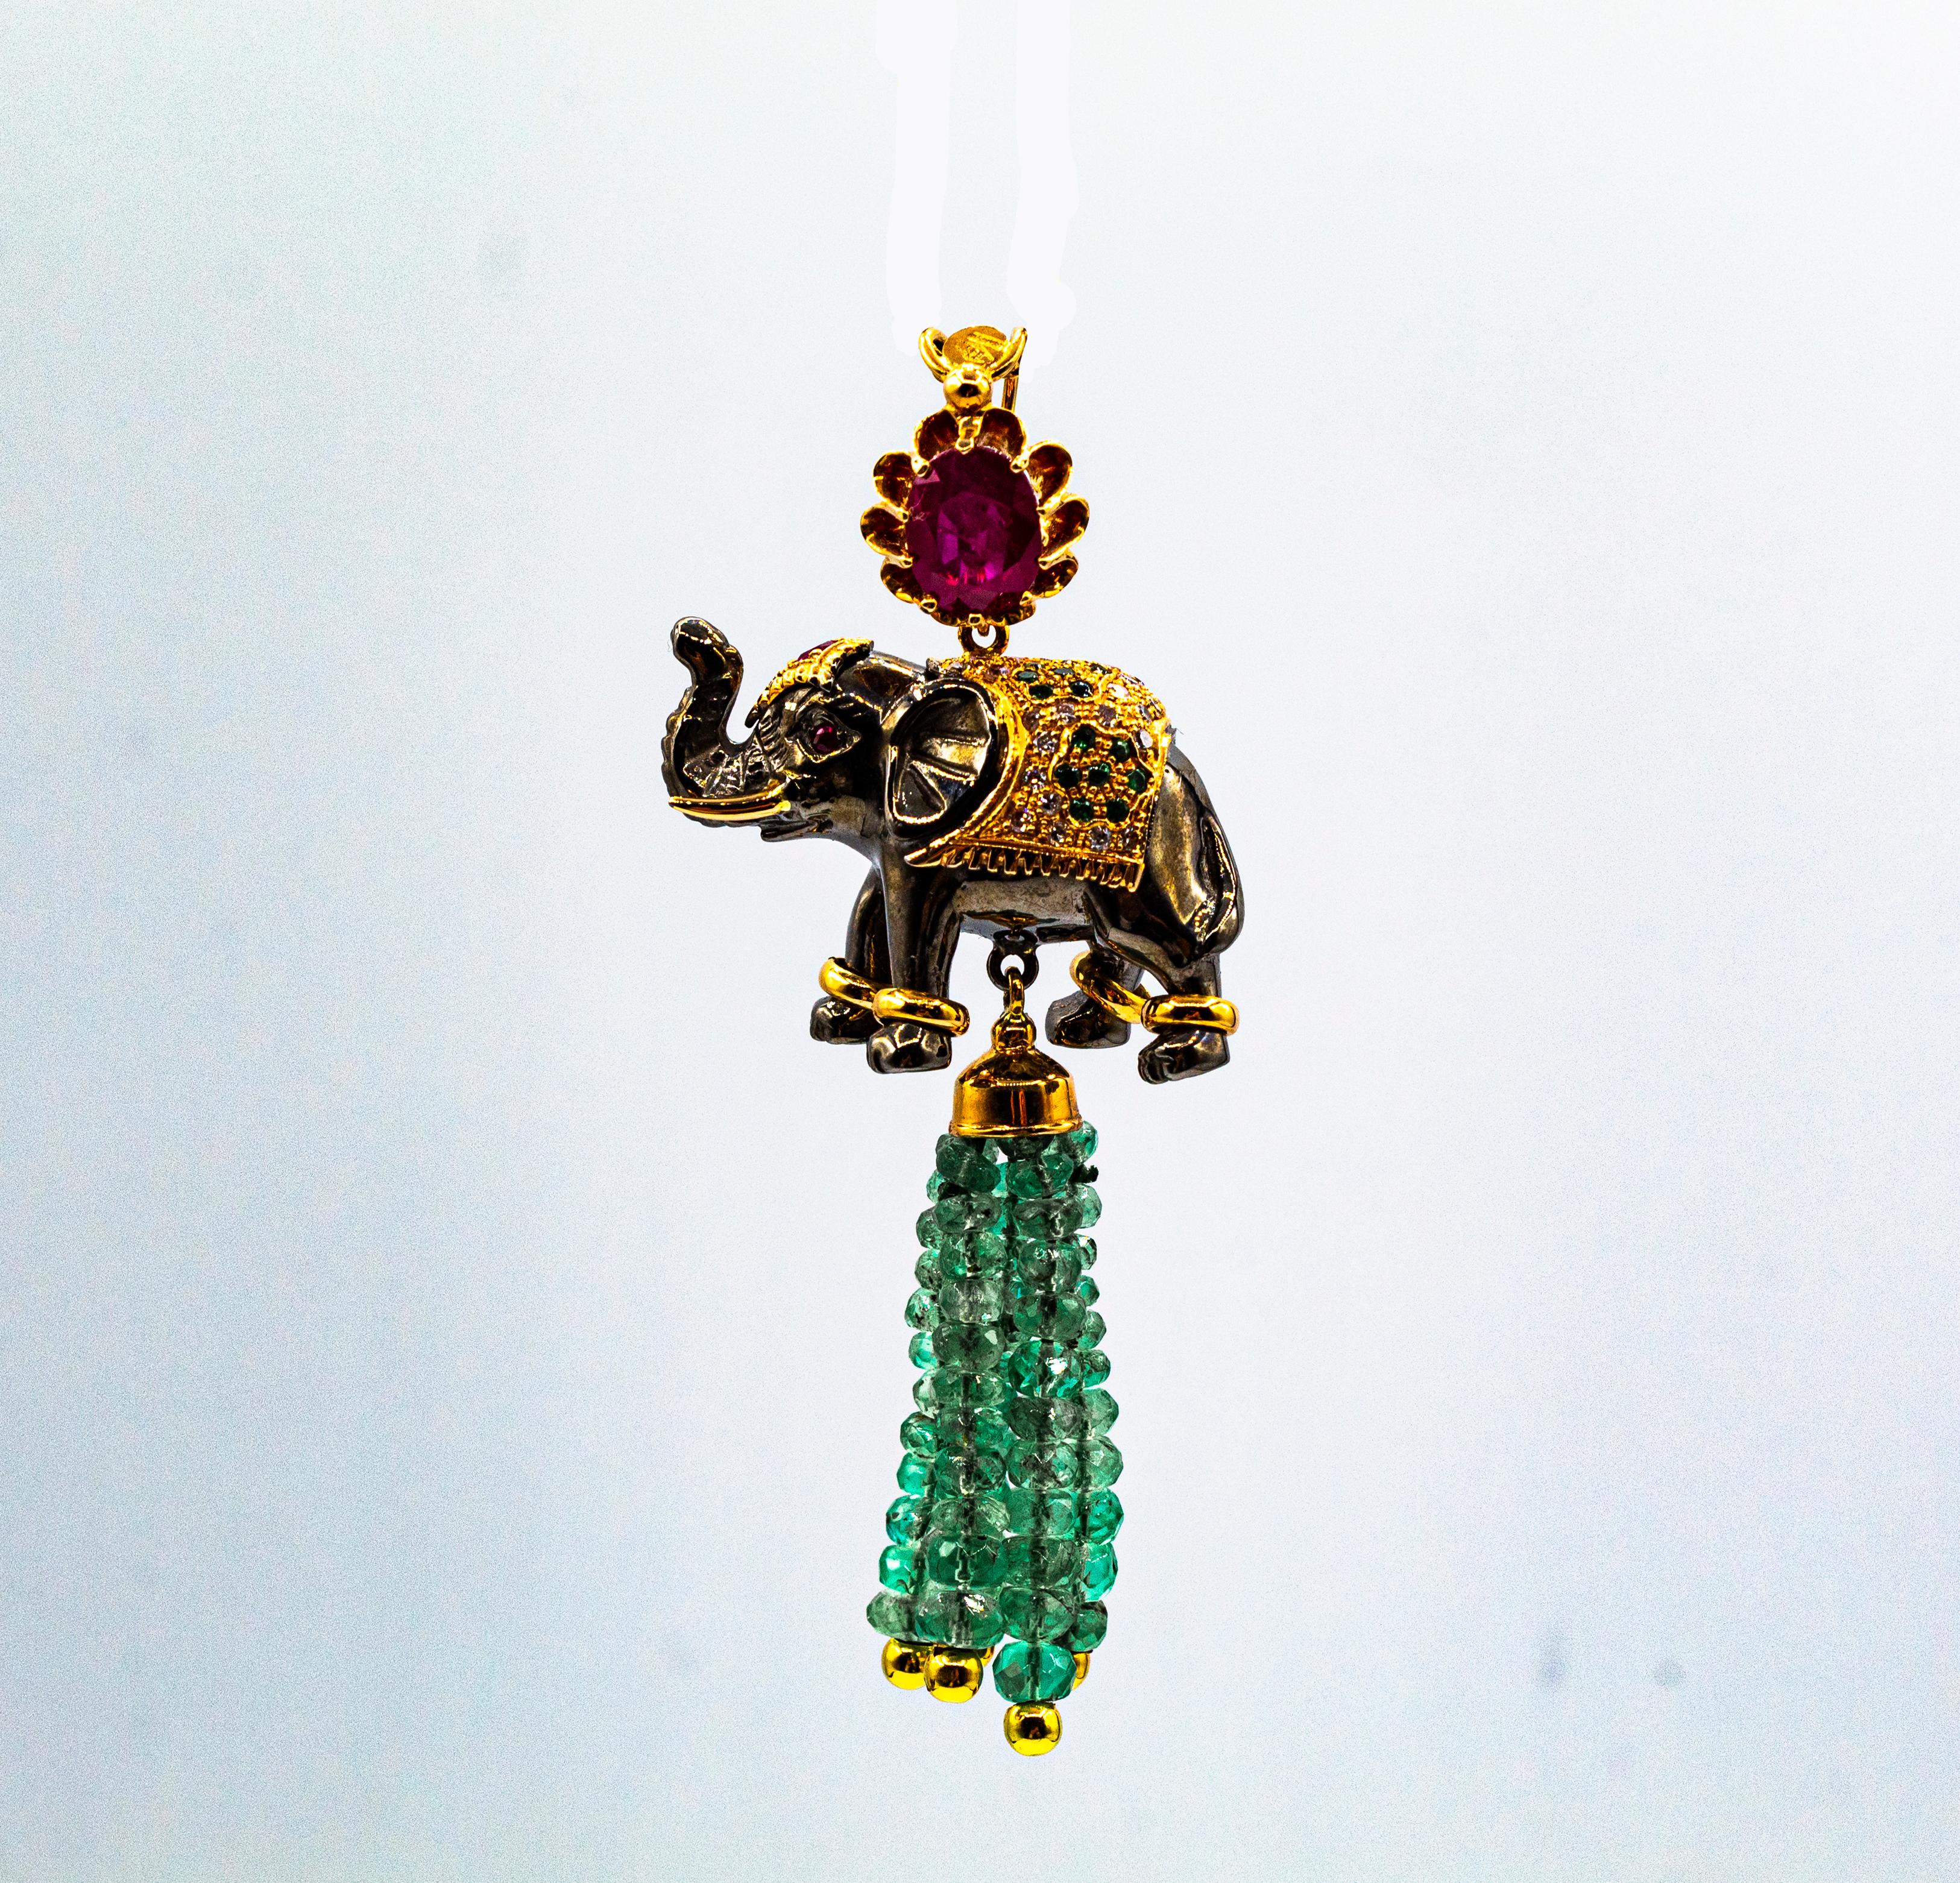 This Elephant Pendant is made of 14K Yellow Gold and Sterling Silver.
This Pendant has 0.35 Carats of White Brilliant Cut Diamonds.
This Pendant has 19.90 Carats of Emeralds.
This Pendant has 3.10 Carats of Rubies.
This Pendant has 0.30 Carats of